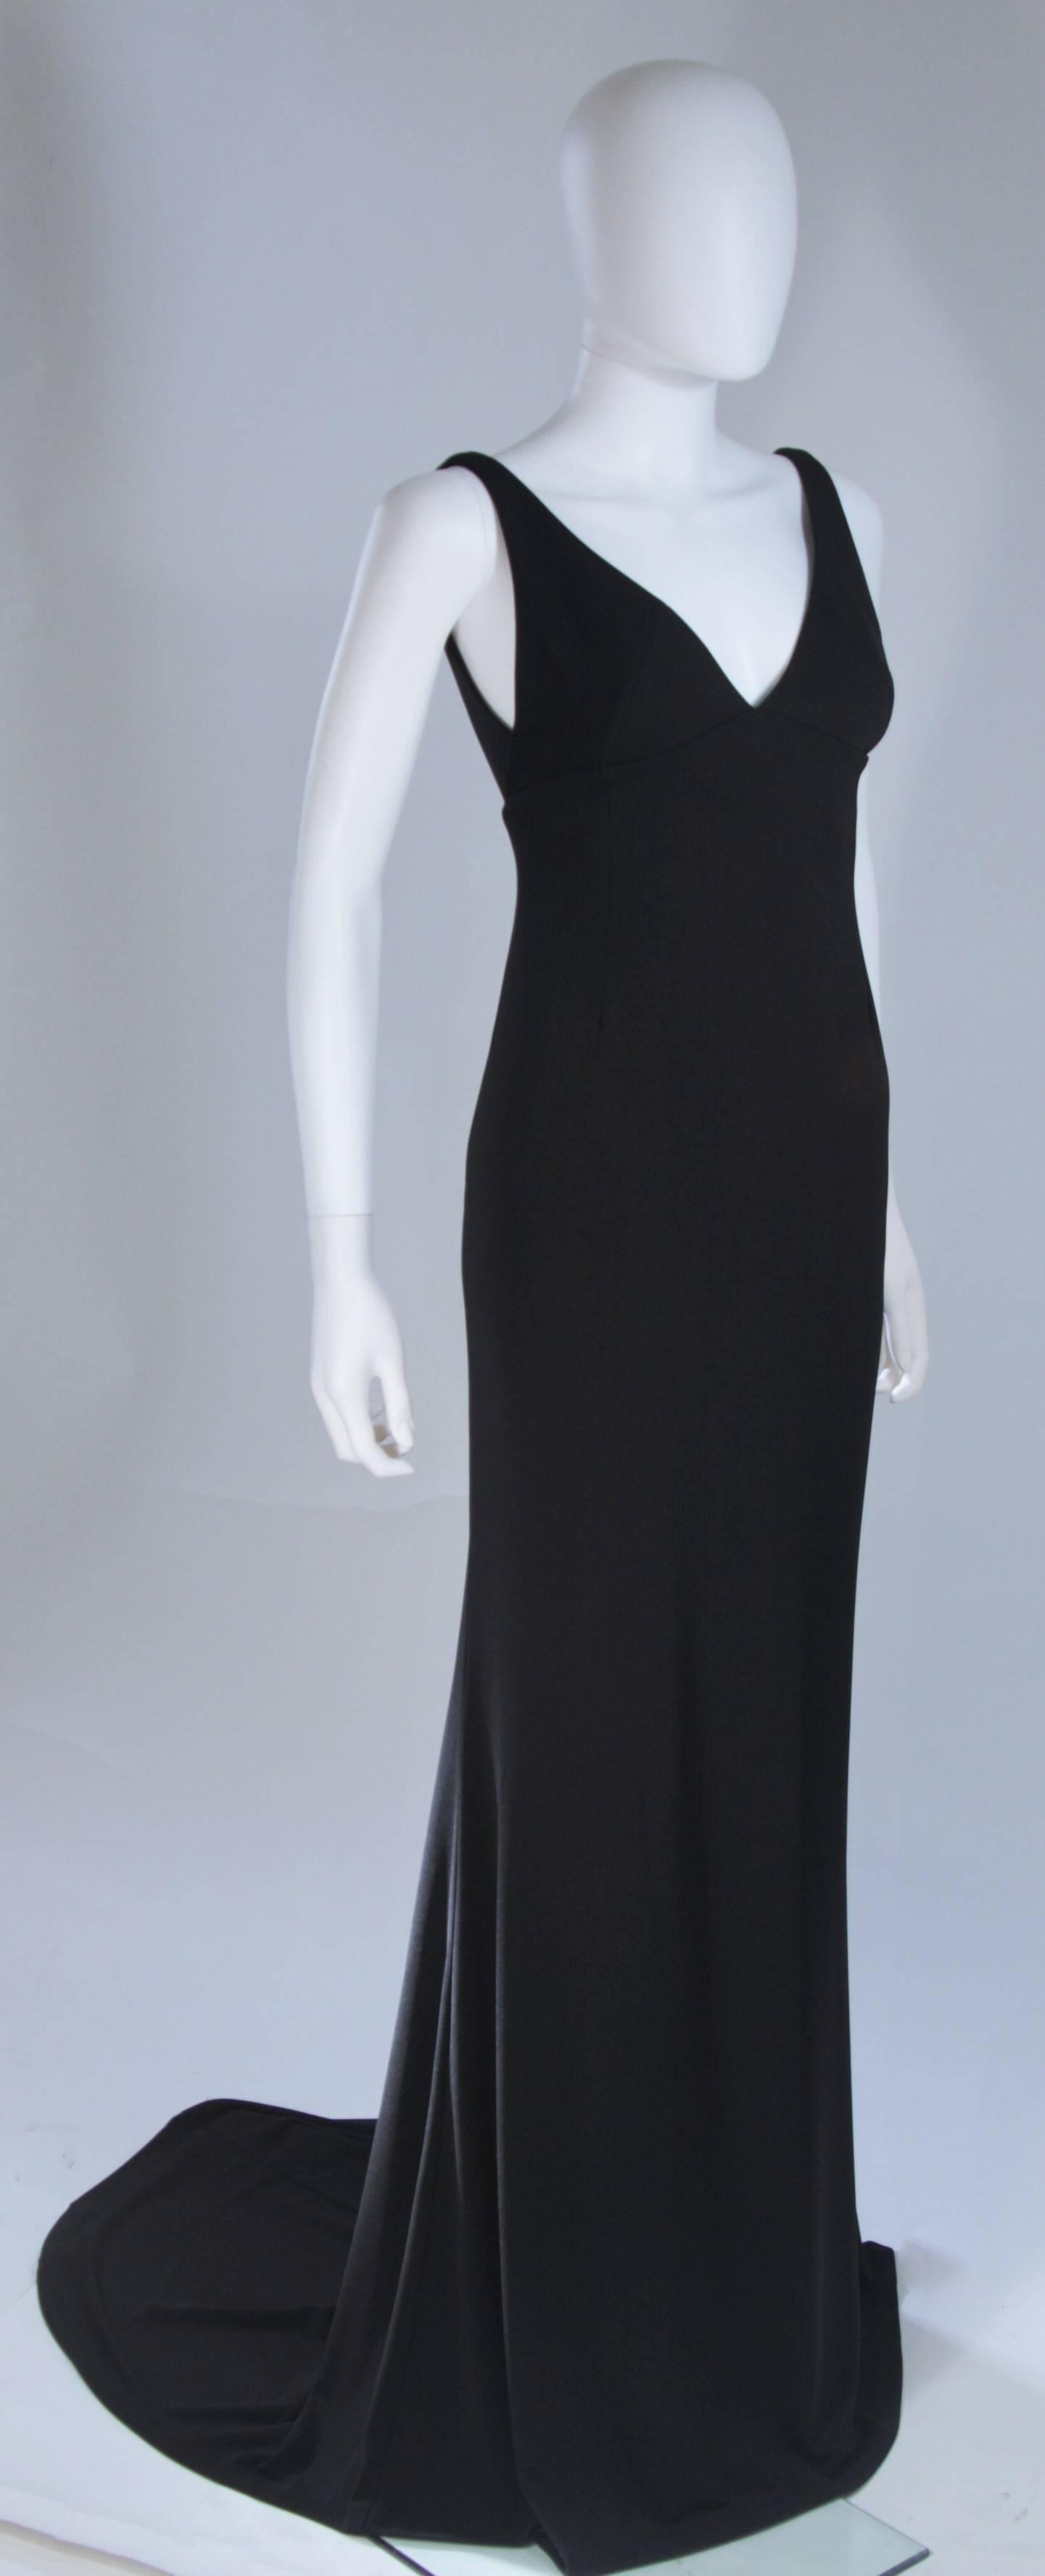 alex perry gown